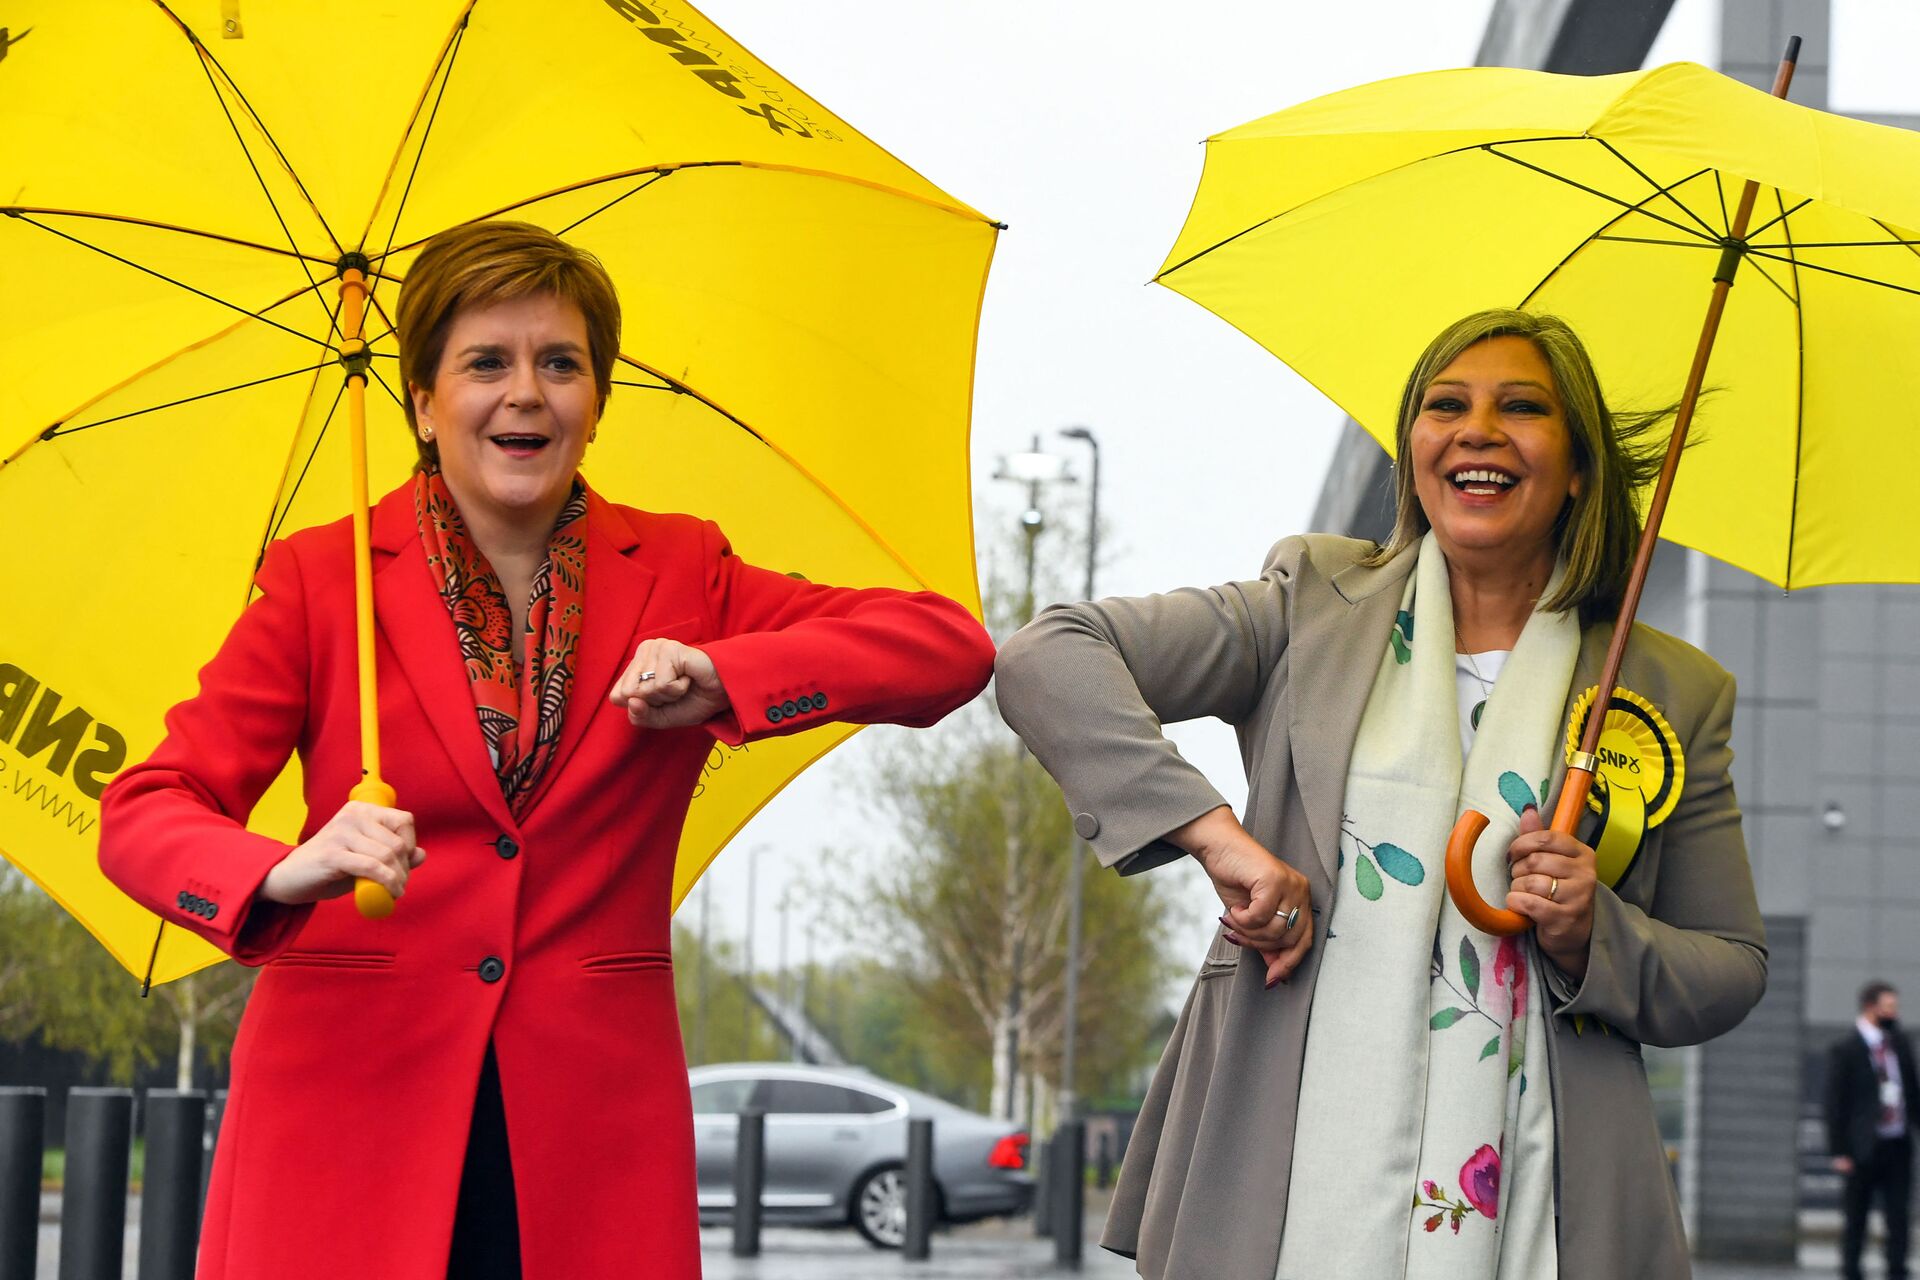 Scottish Pro-Independence Parties Win Majority in Parliamentary Elections - Sputnik International, 1920, 08.05.2021